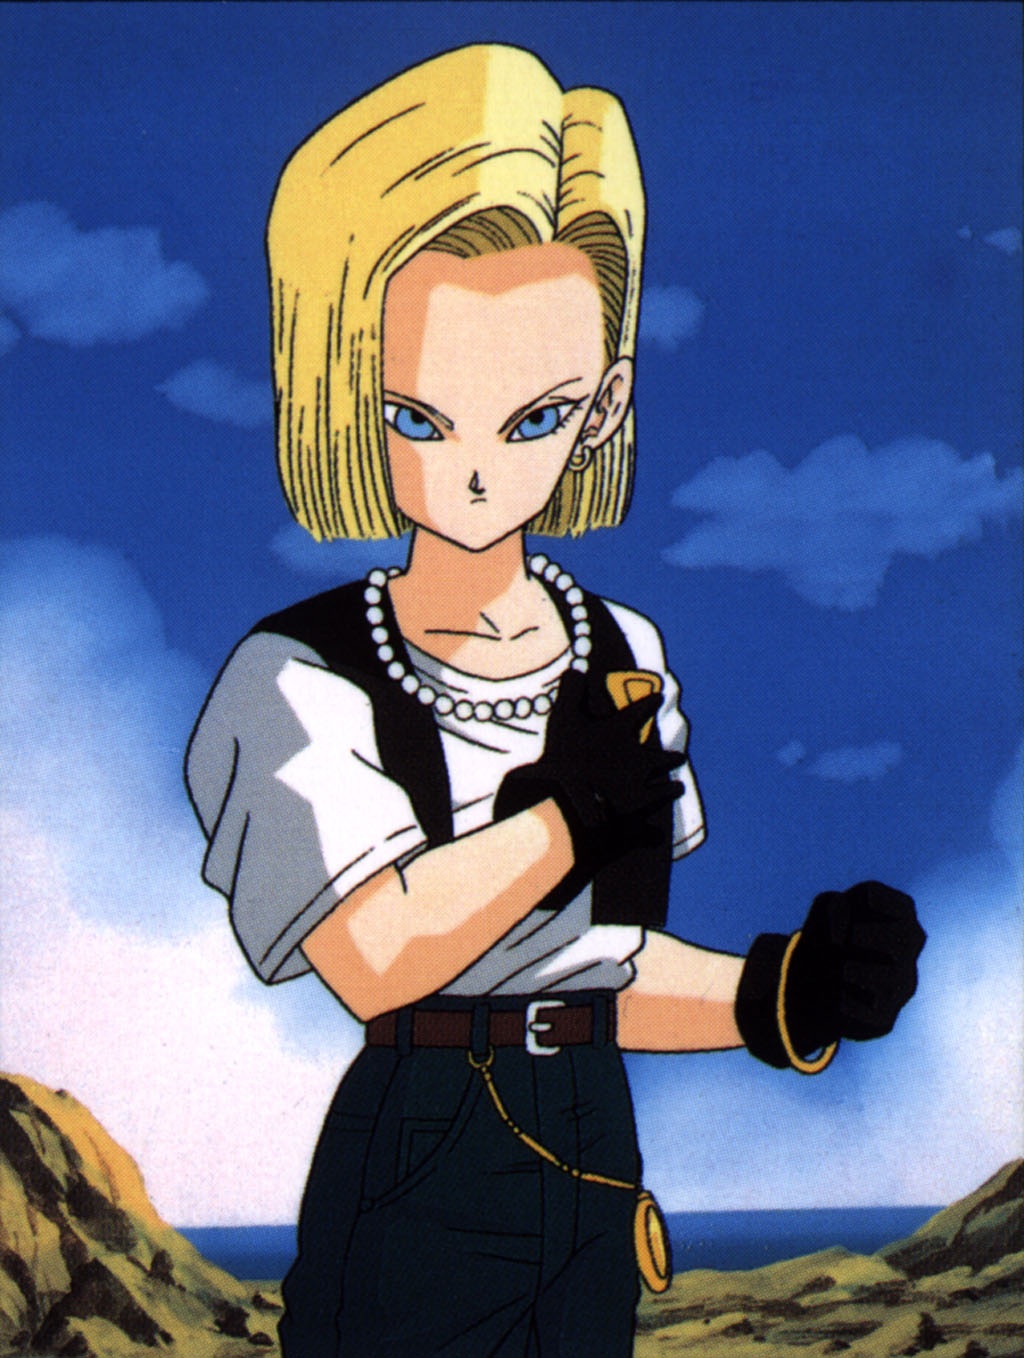 Dragon Ball Super Android 18 Tracksuit Android Androide Super Deviantart Dragon Ball Dbz Lazuli